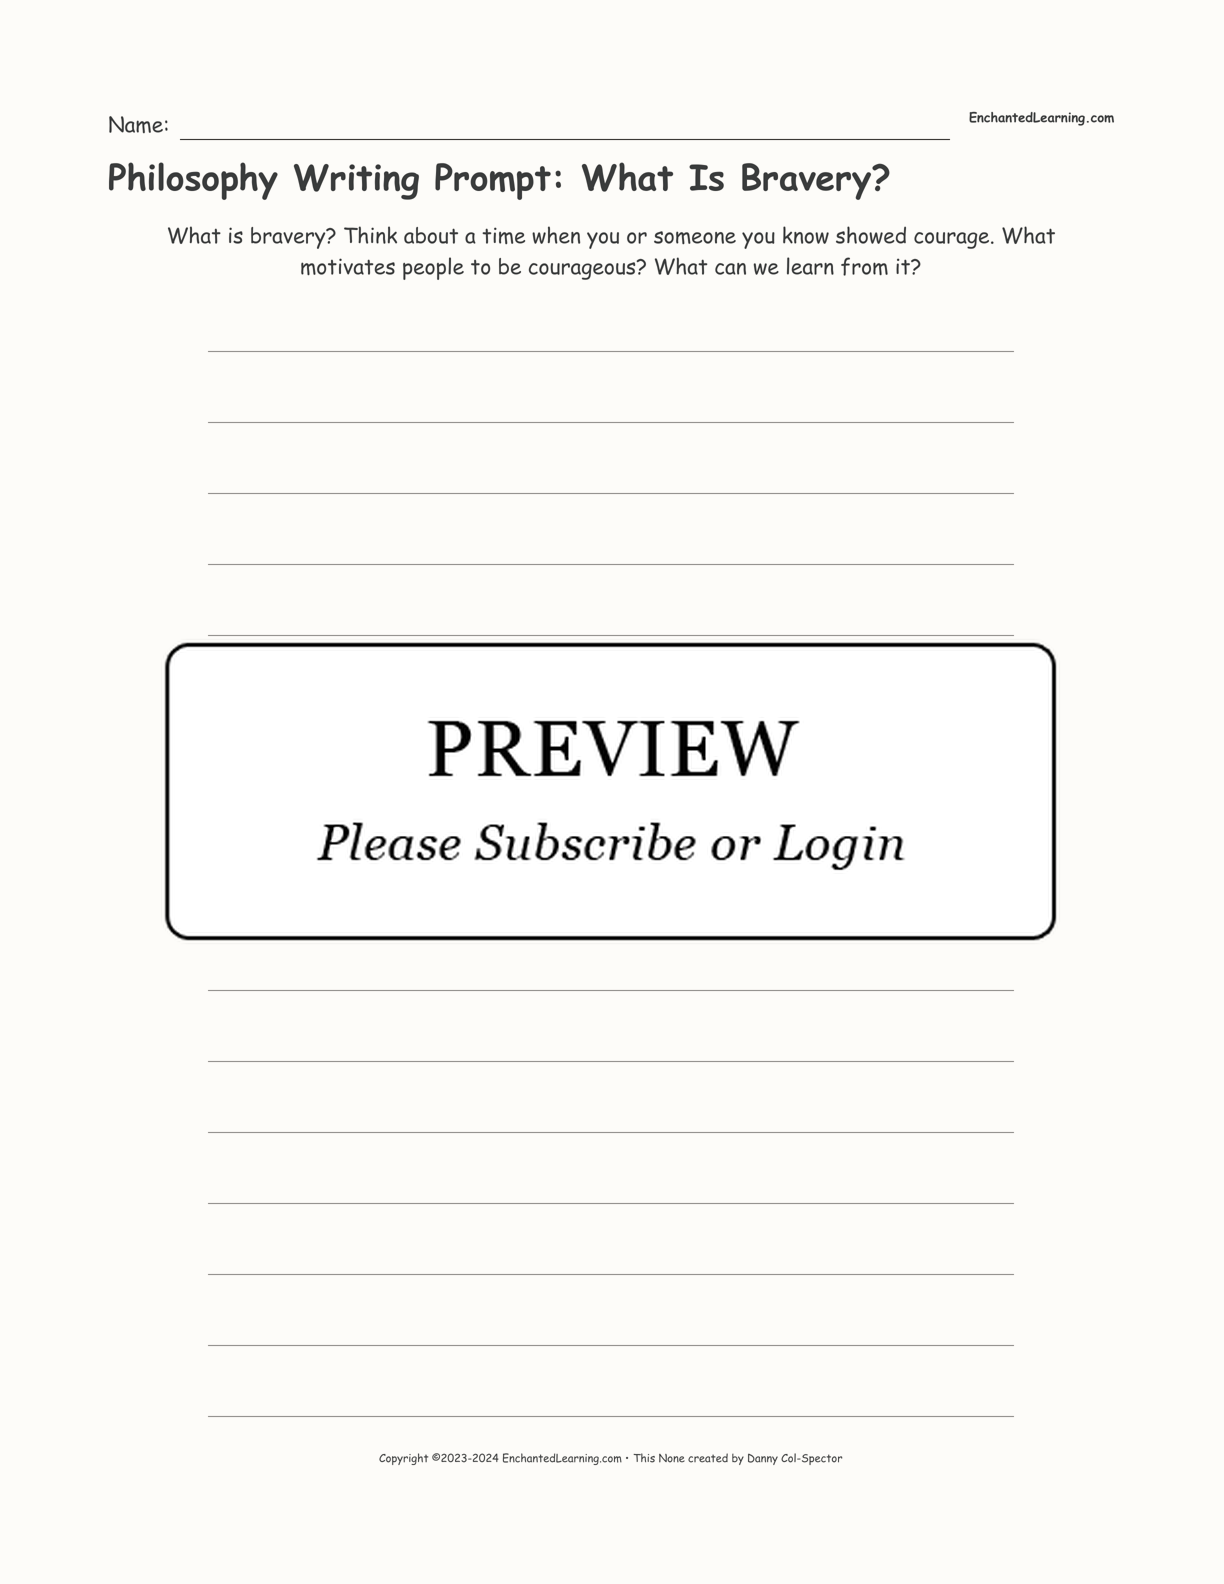 Philosophy Writing Prompt: What Is Bravery? interactive printout page 1